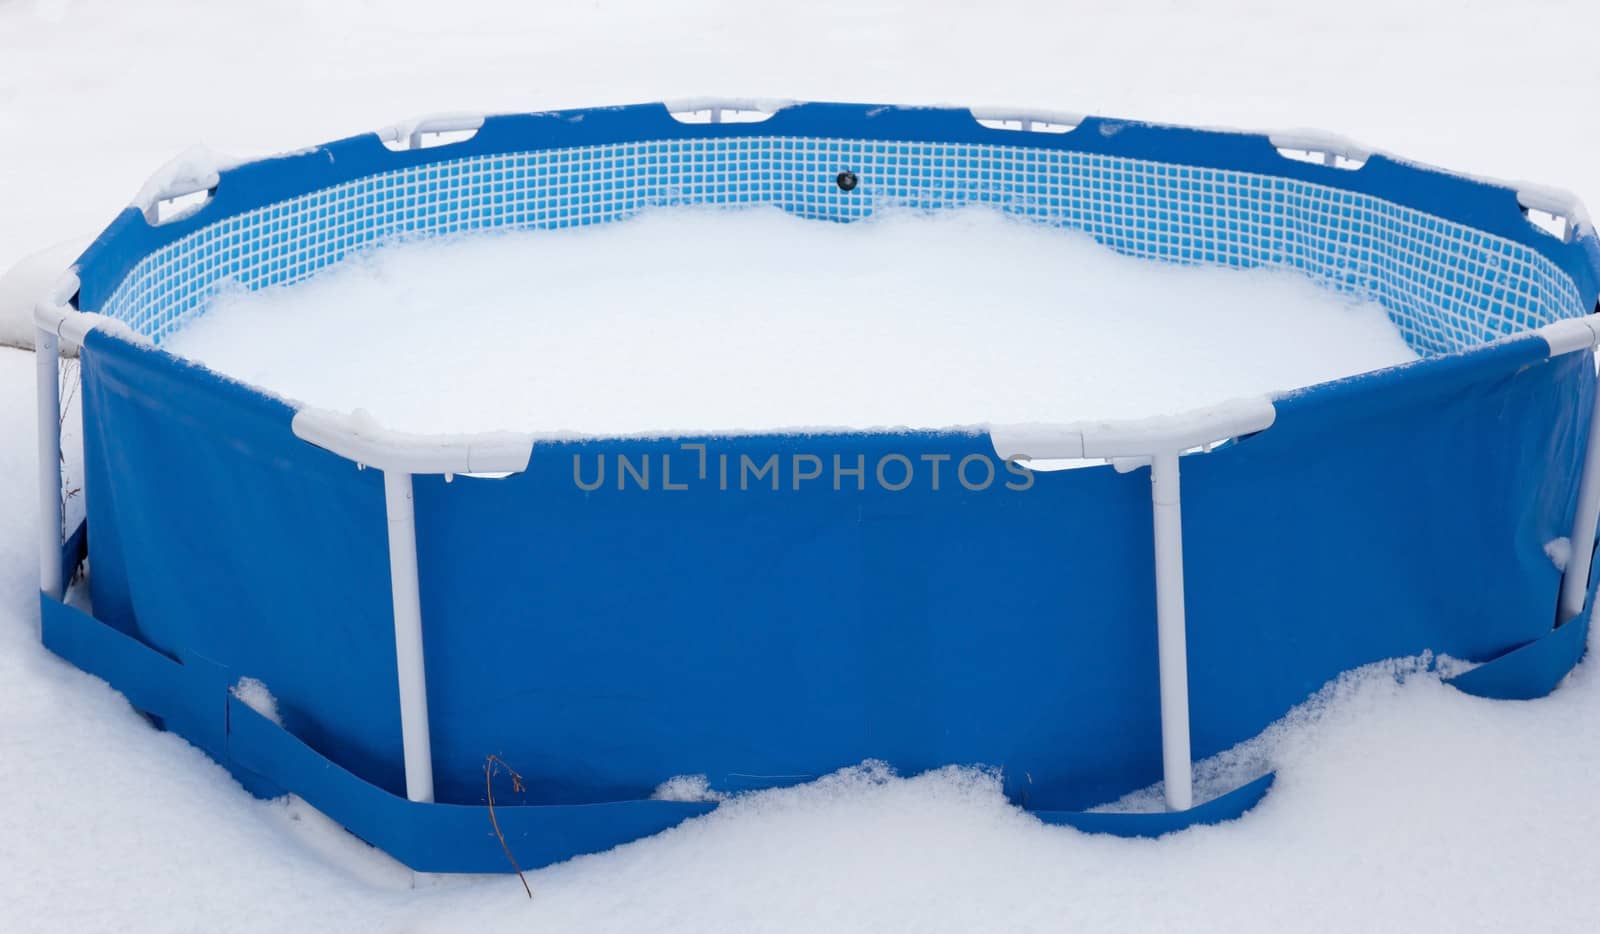 Abandoned swimming pool at winter, surrounded with snow by AleksandrN